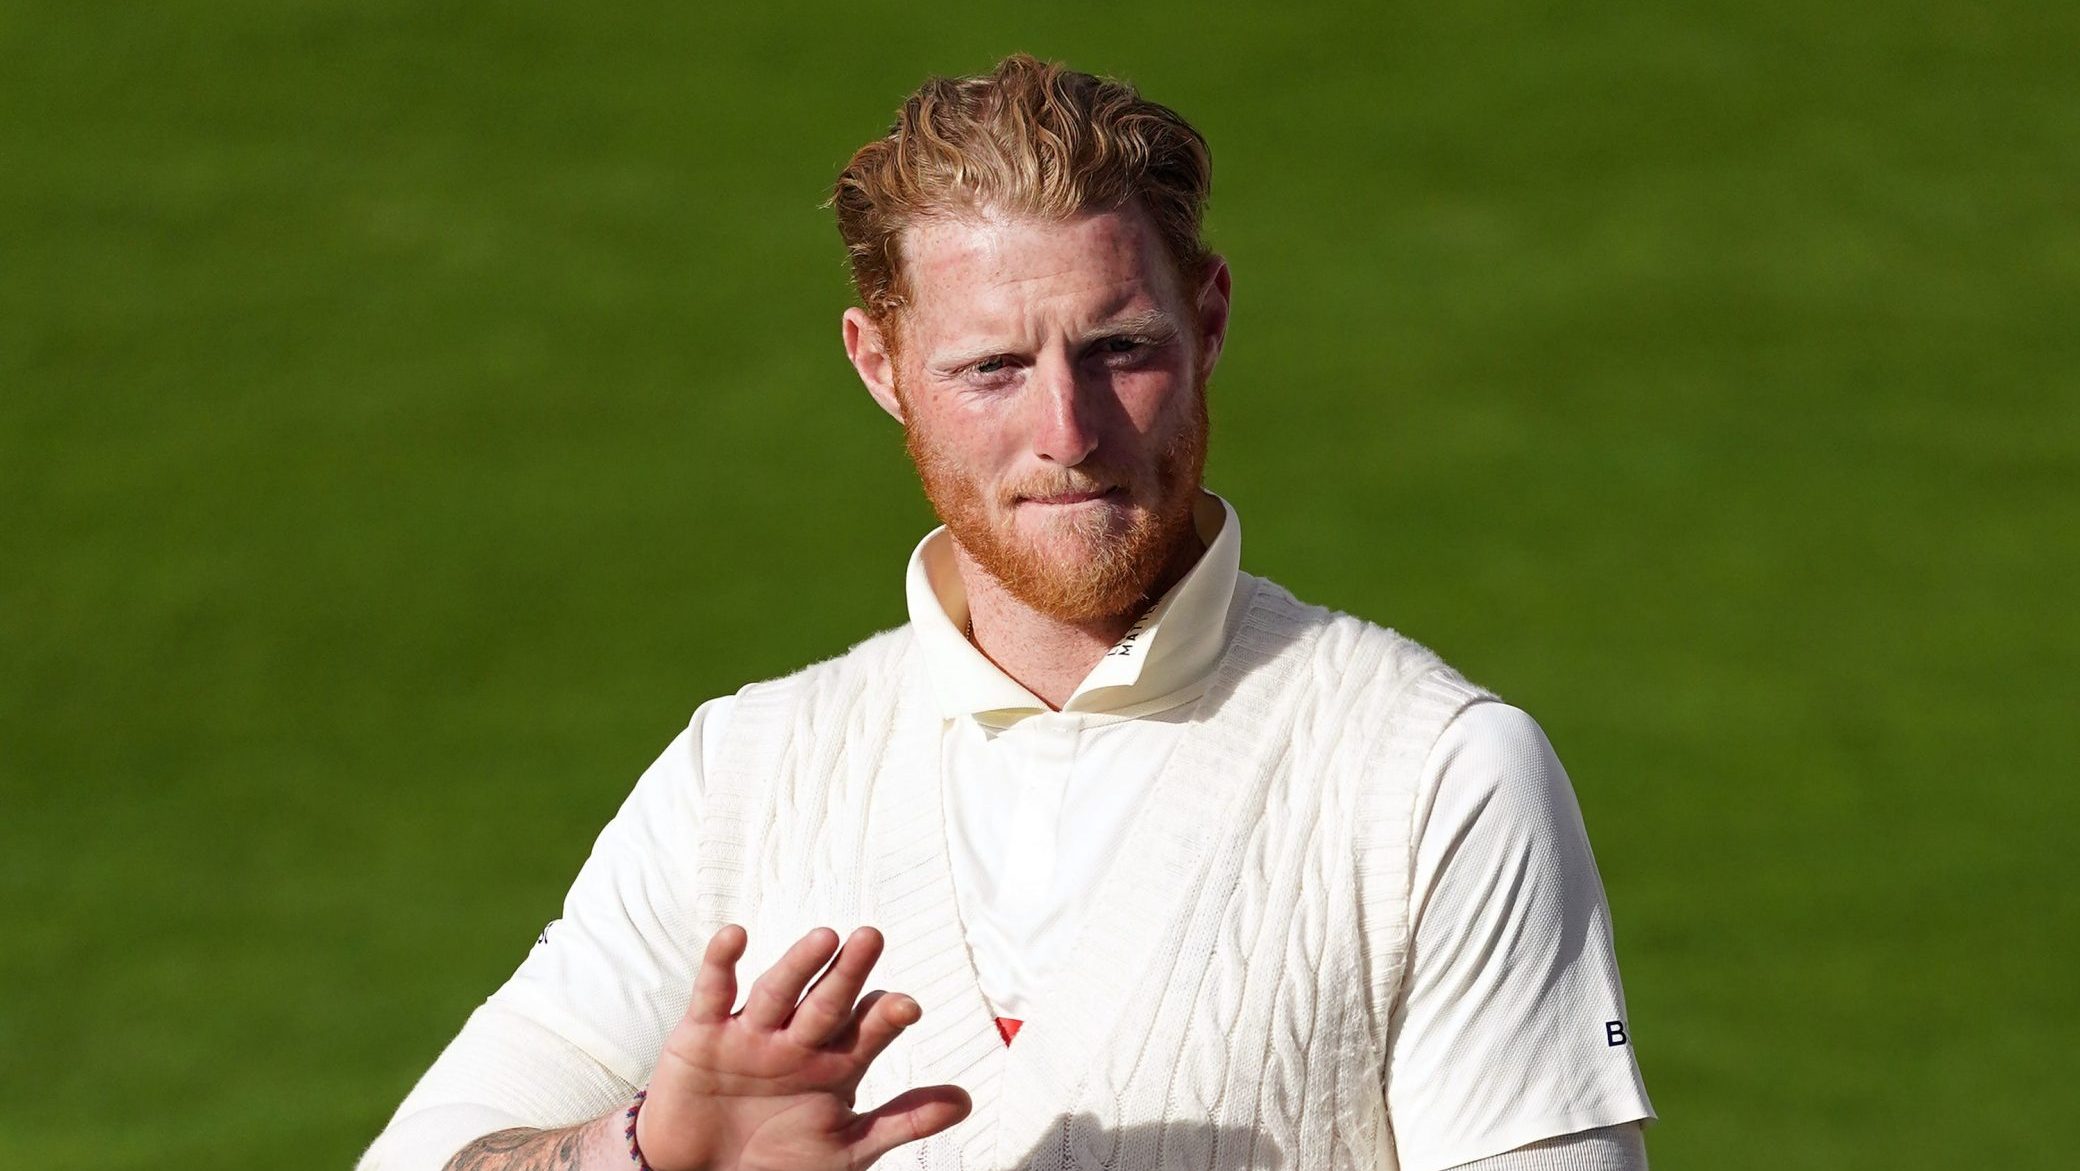 The Sun pays damages to Ben Stokes over ‘immoral’ family tragedy story